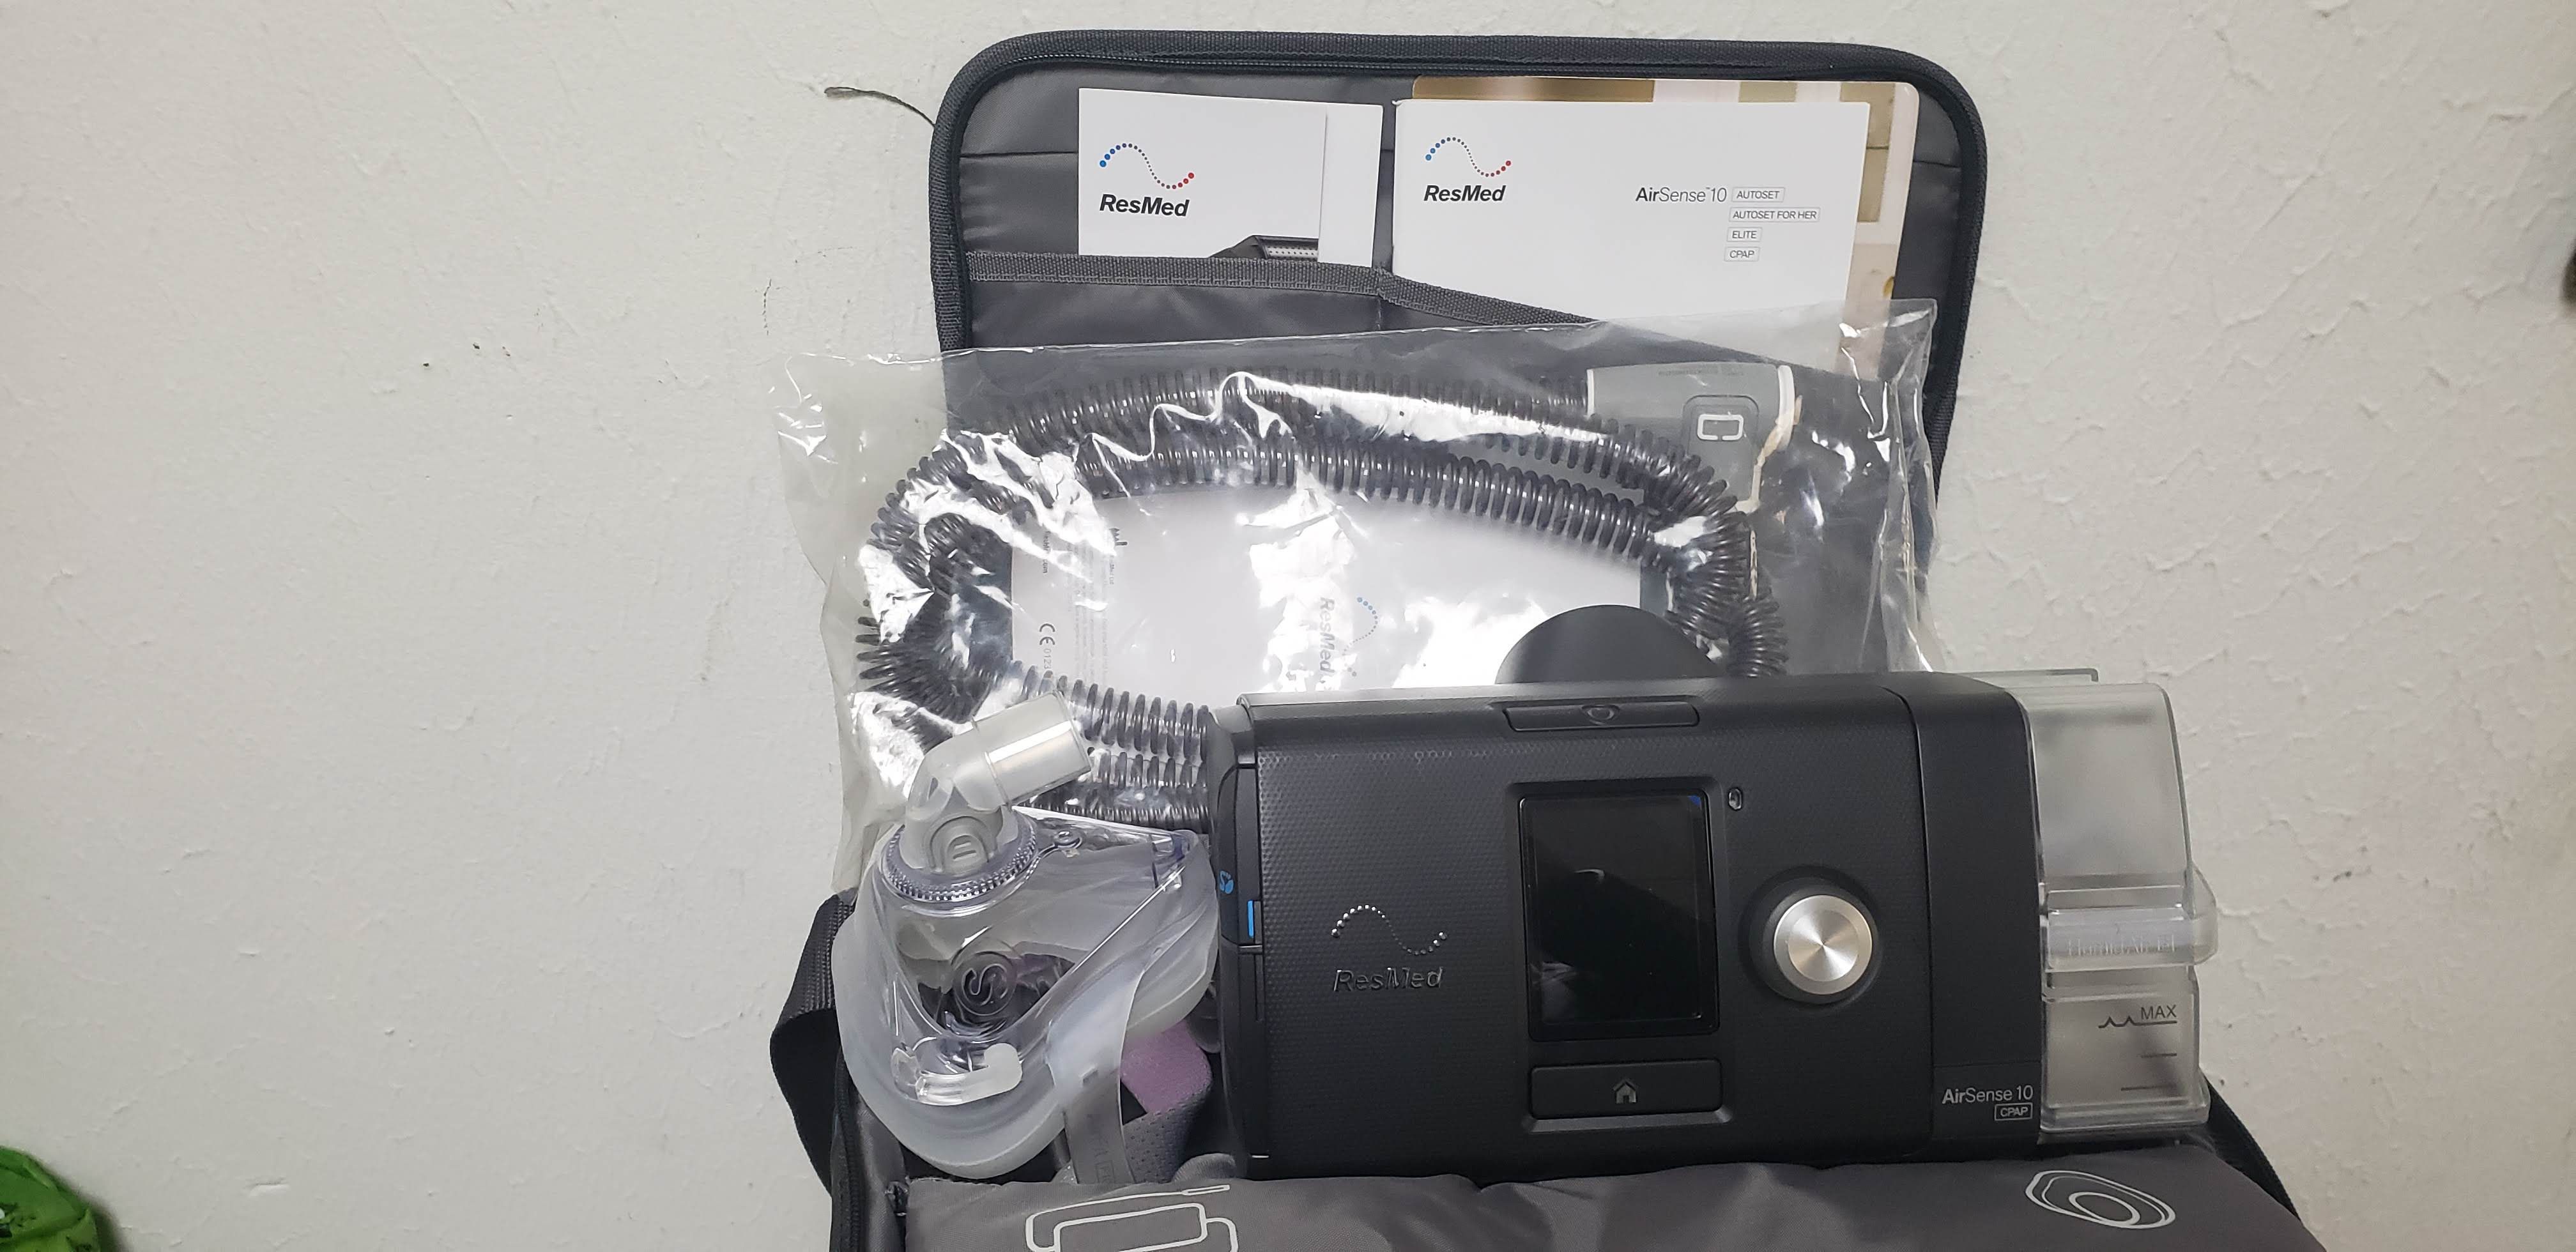 Low hours CPAP Machine Airsense 10 Cpap mask and new tube included